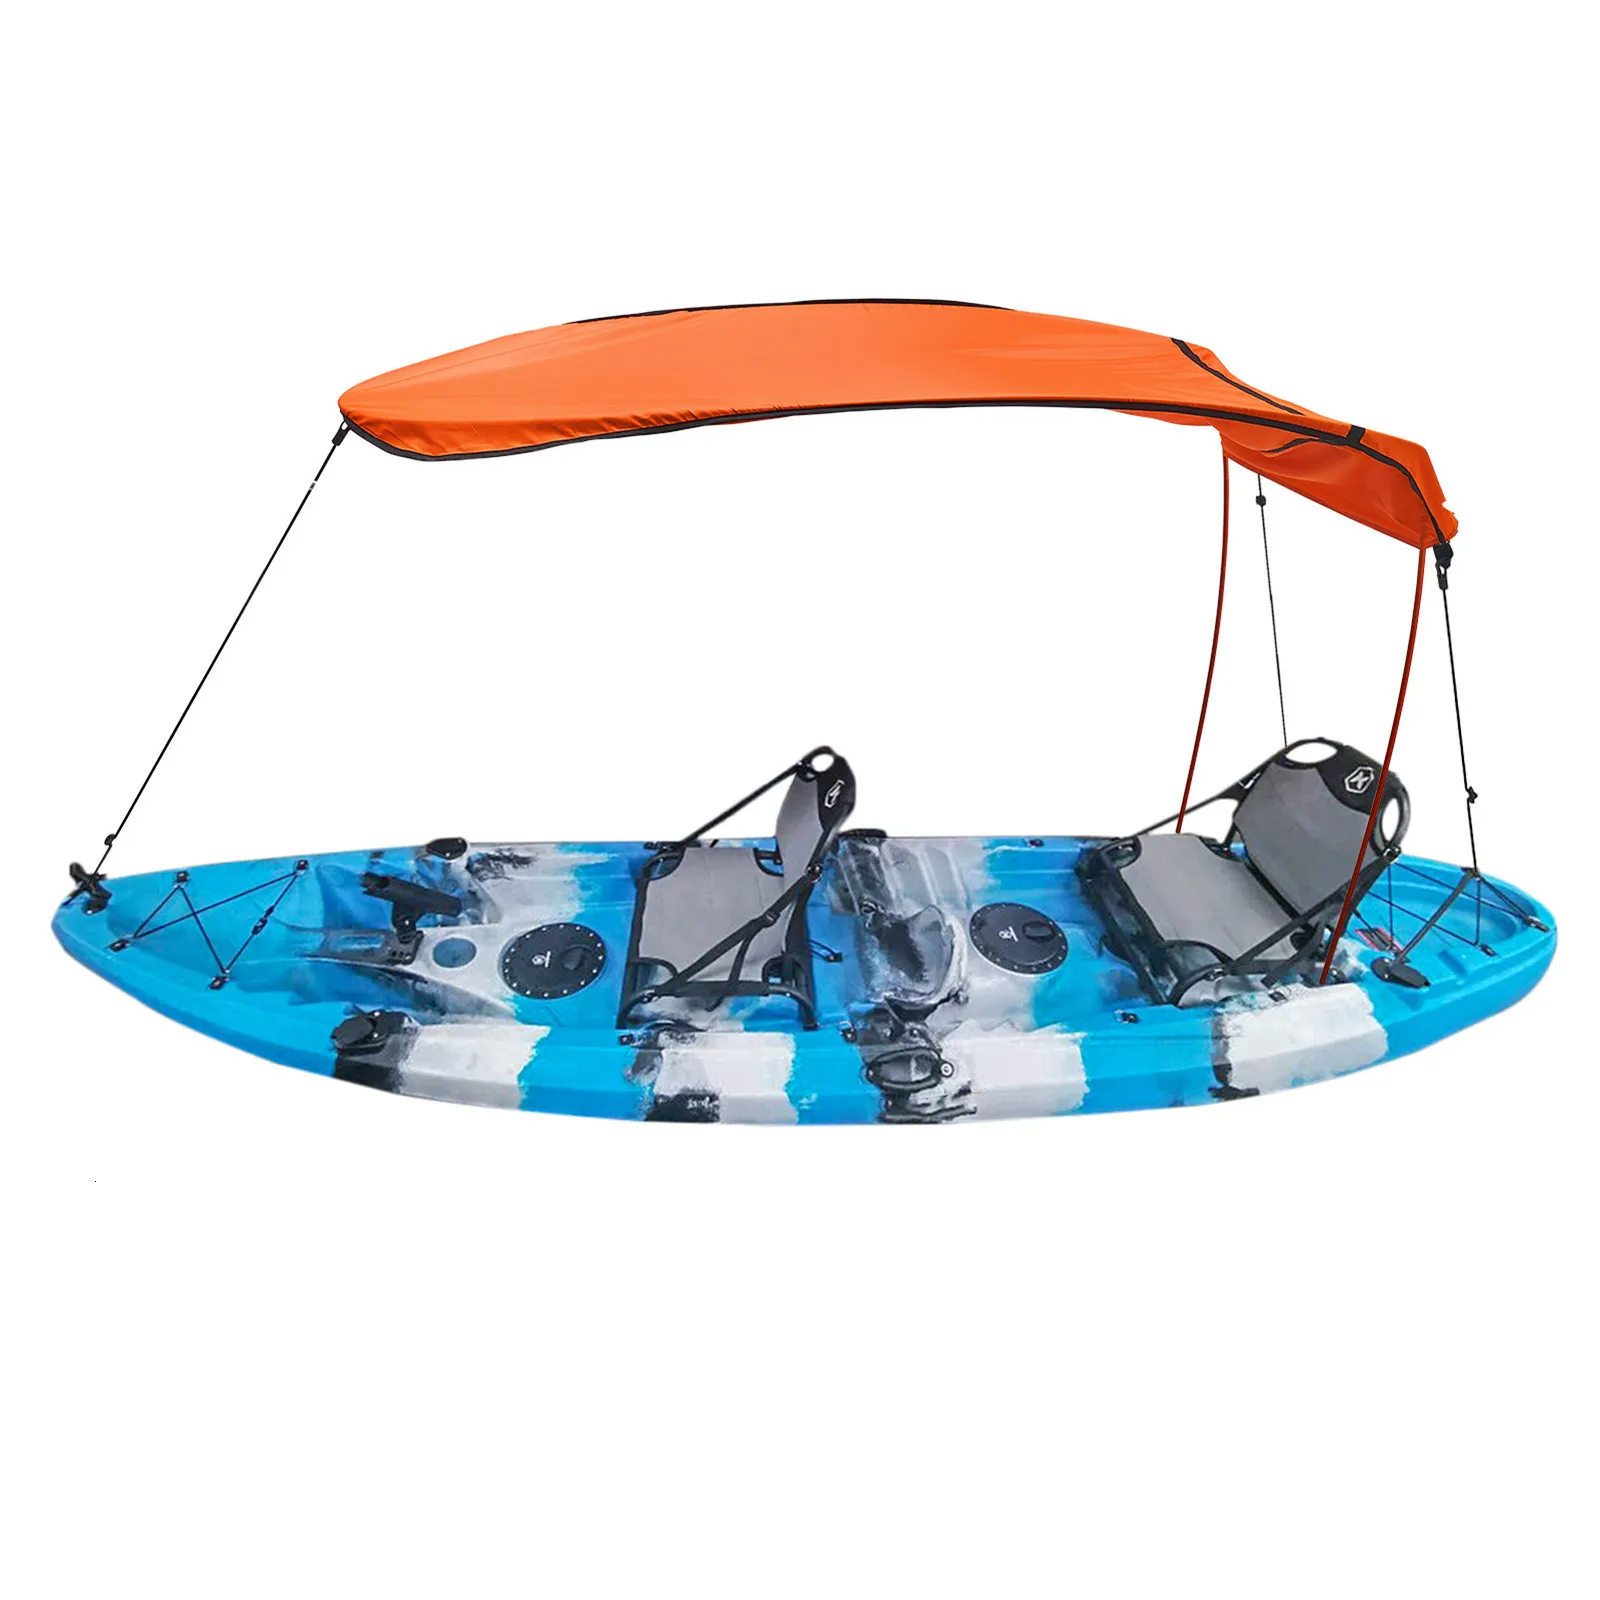 Diving Accessories Waterproof Kayak Canoe Canopy Sun Shade Canopy For Kayak  Boat Canoe Awning Top Cover Beach Gear Kayak Accessories 230802